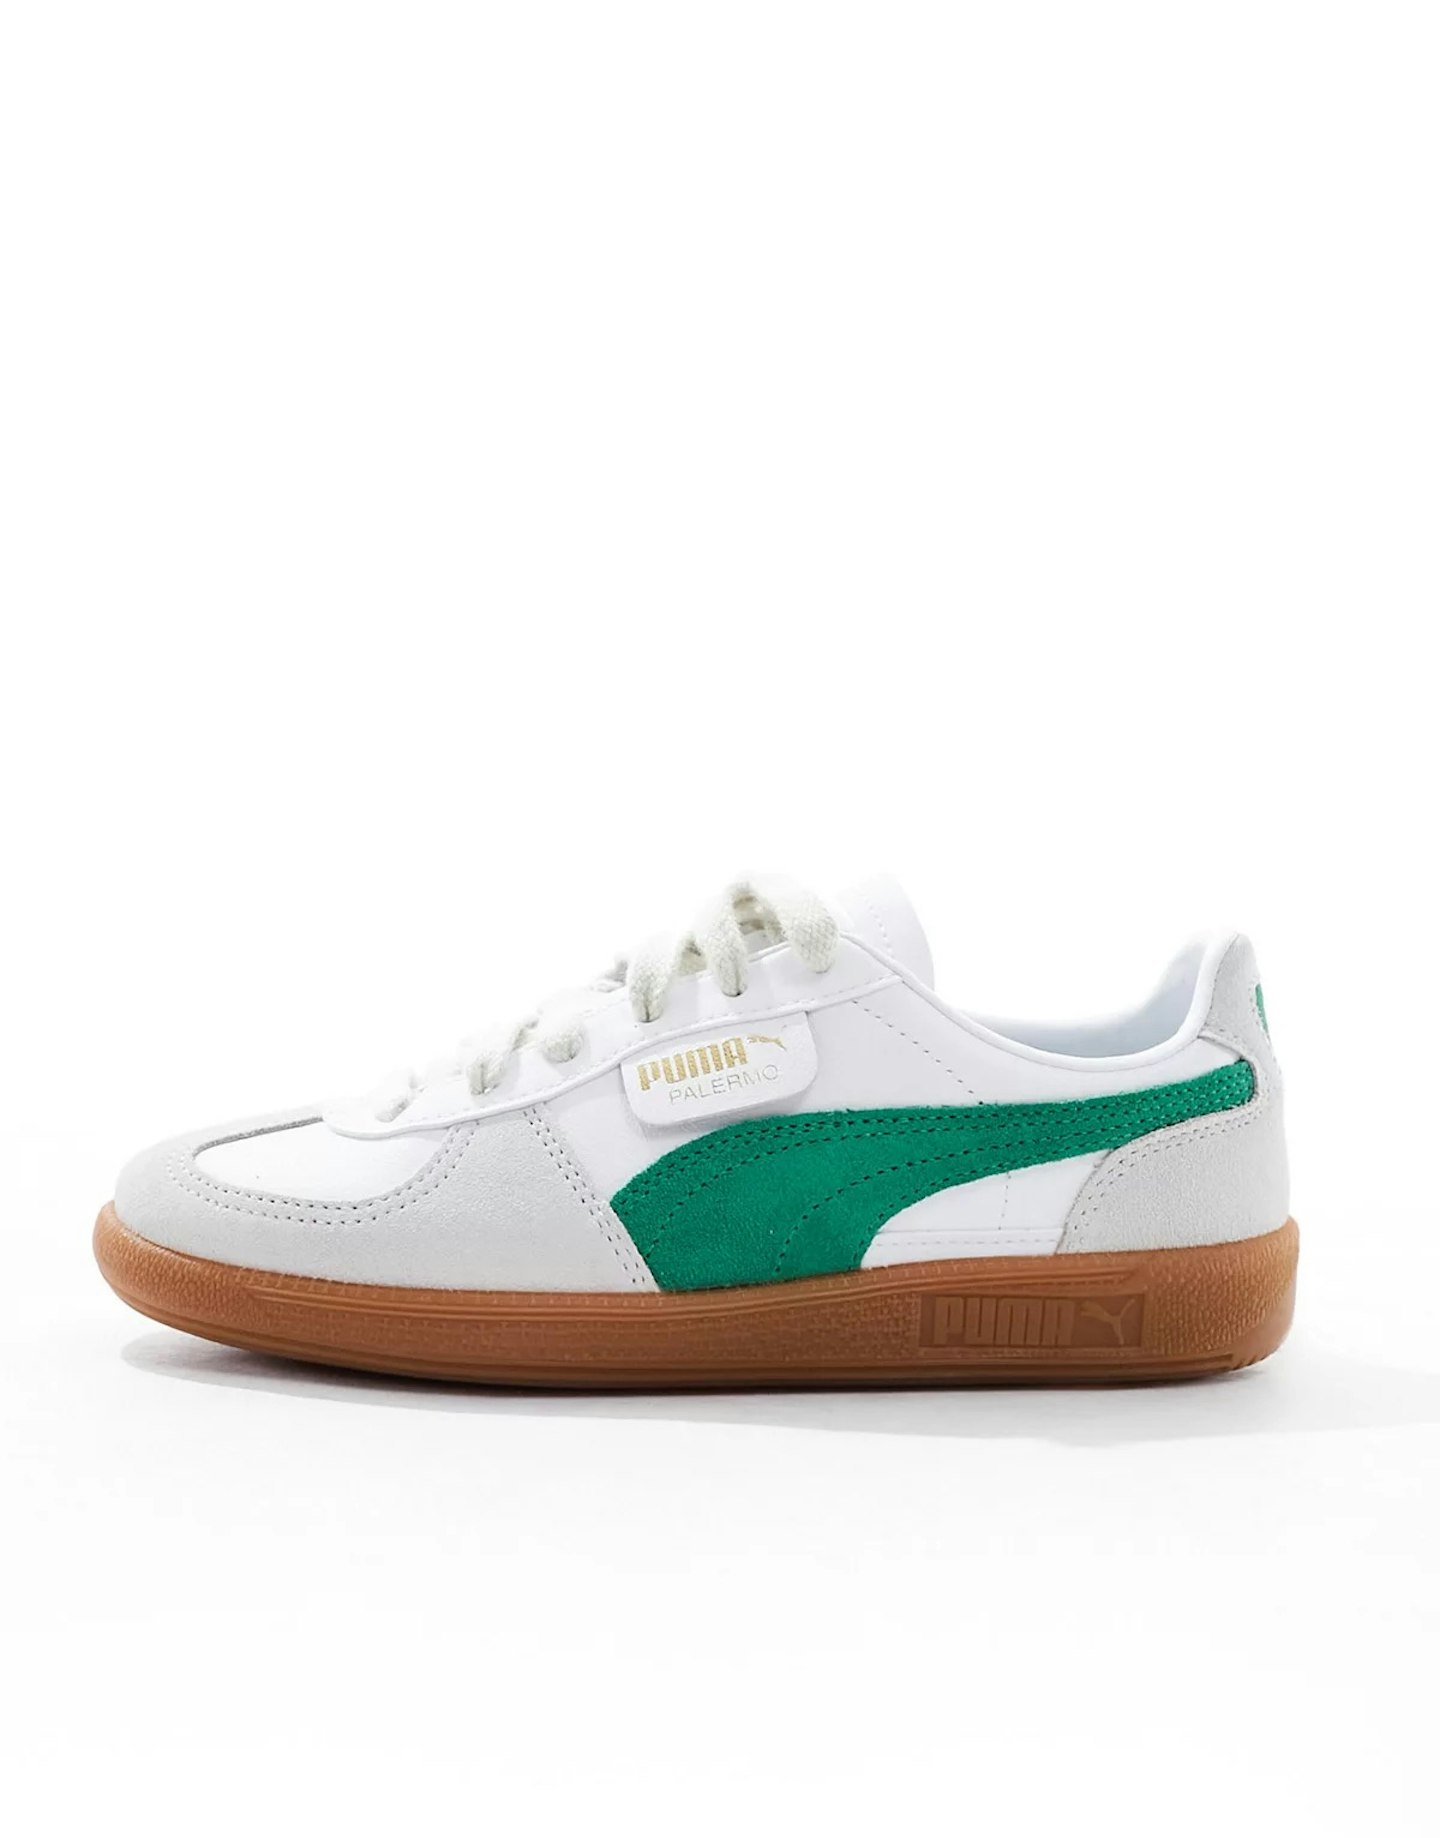  Puma Palermo Leather trainers in white with green detail - WHITE